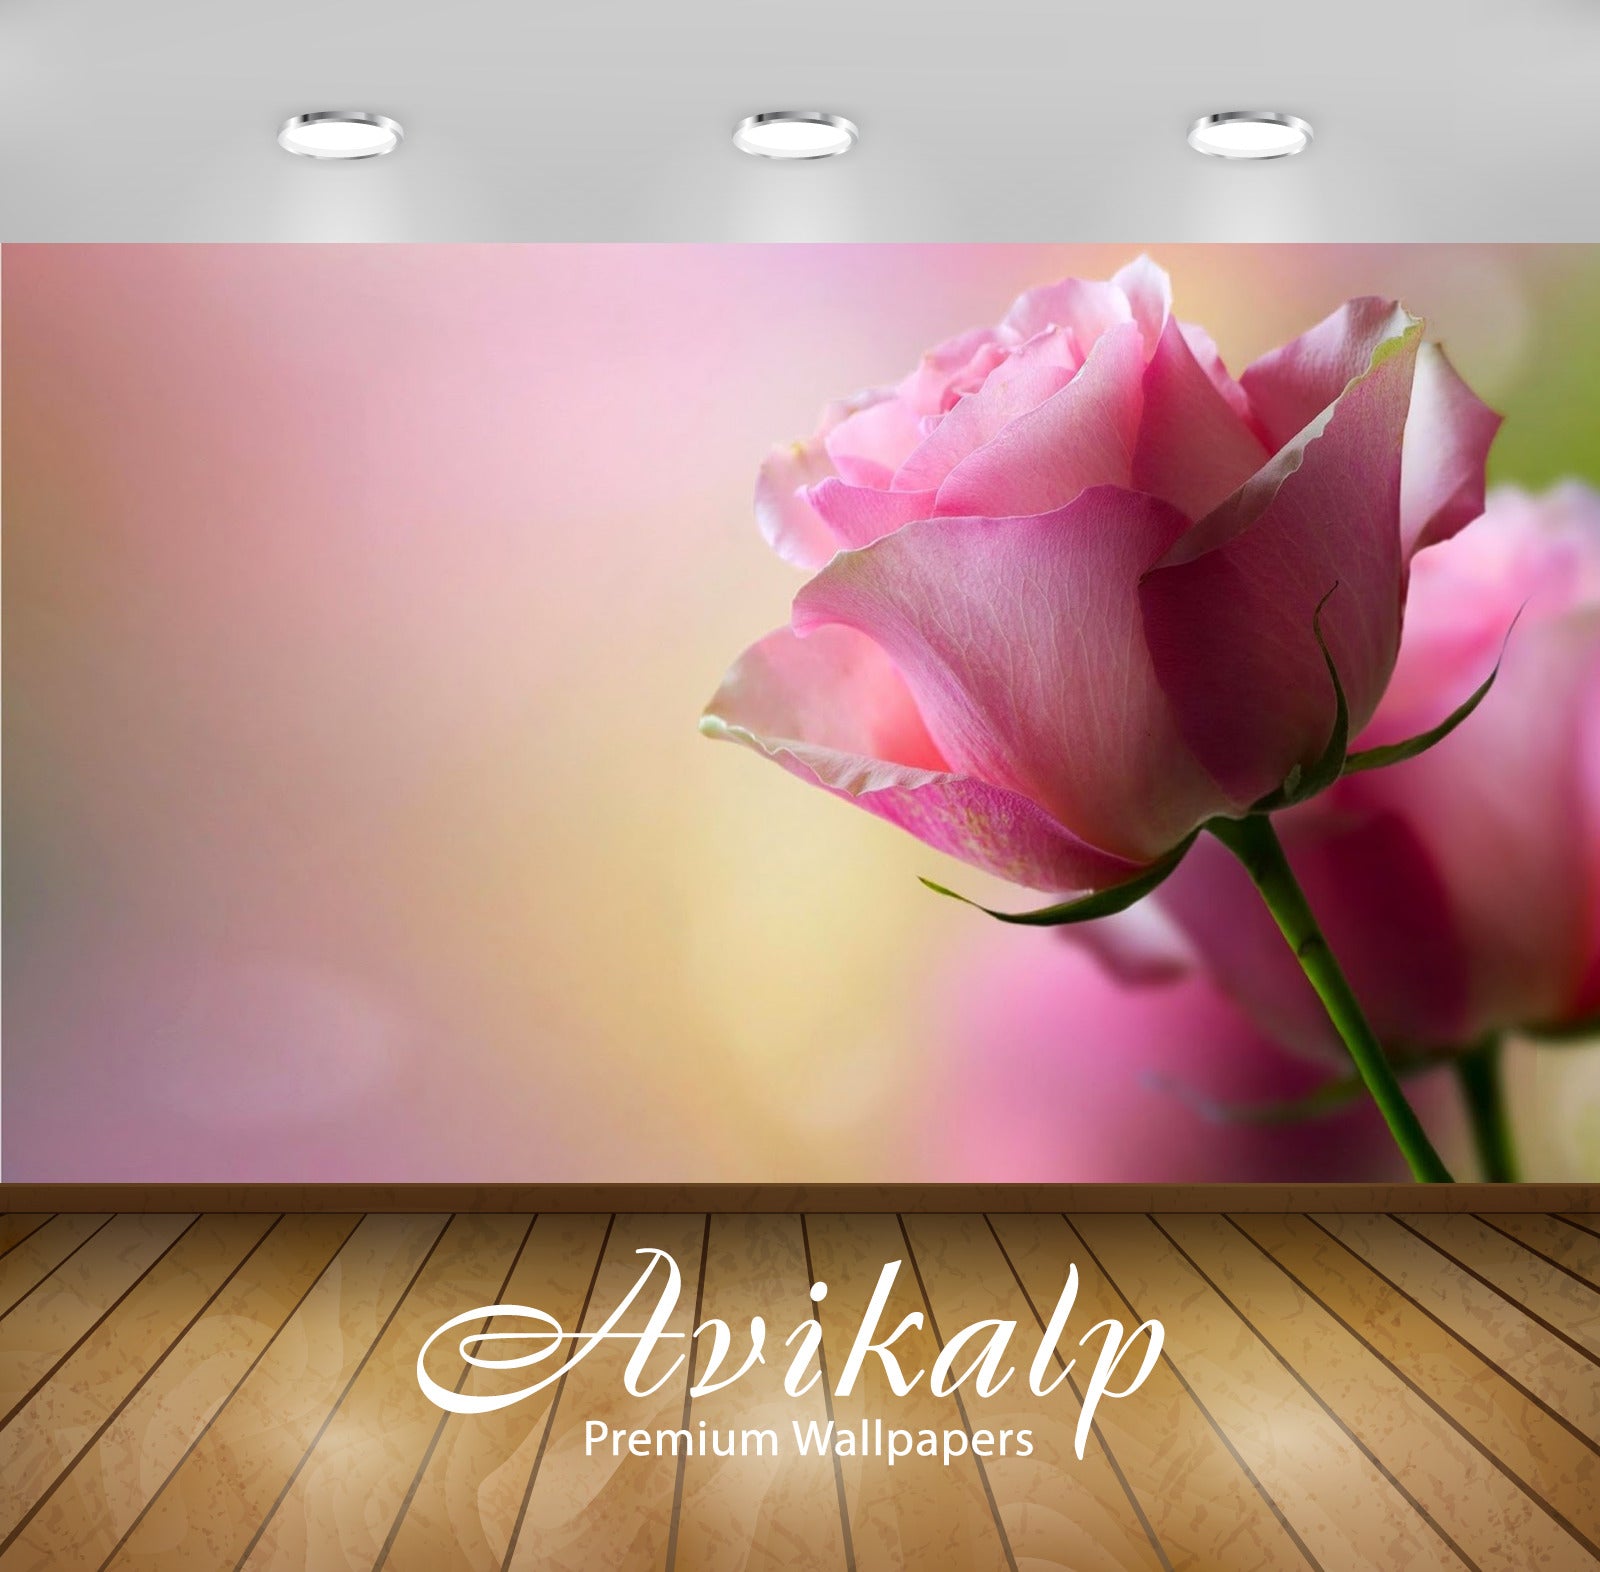 Avikalp Exclusive Awi2428 Beautiful Pink Rose Full HD Wallpapers for Living room, Hall, Kids Room, K